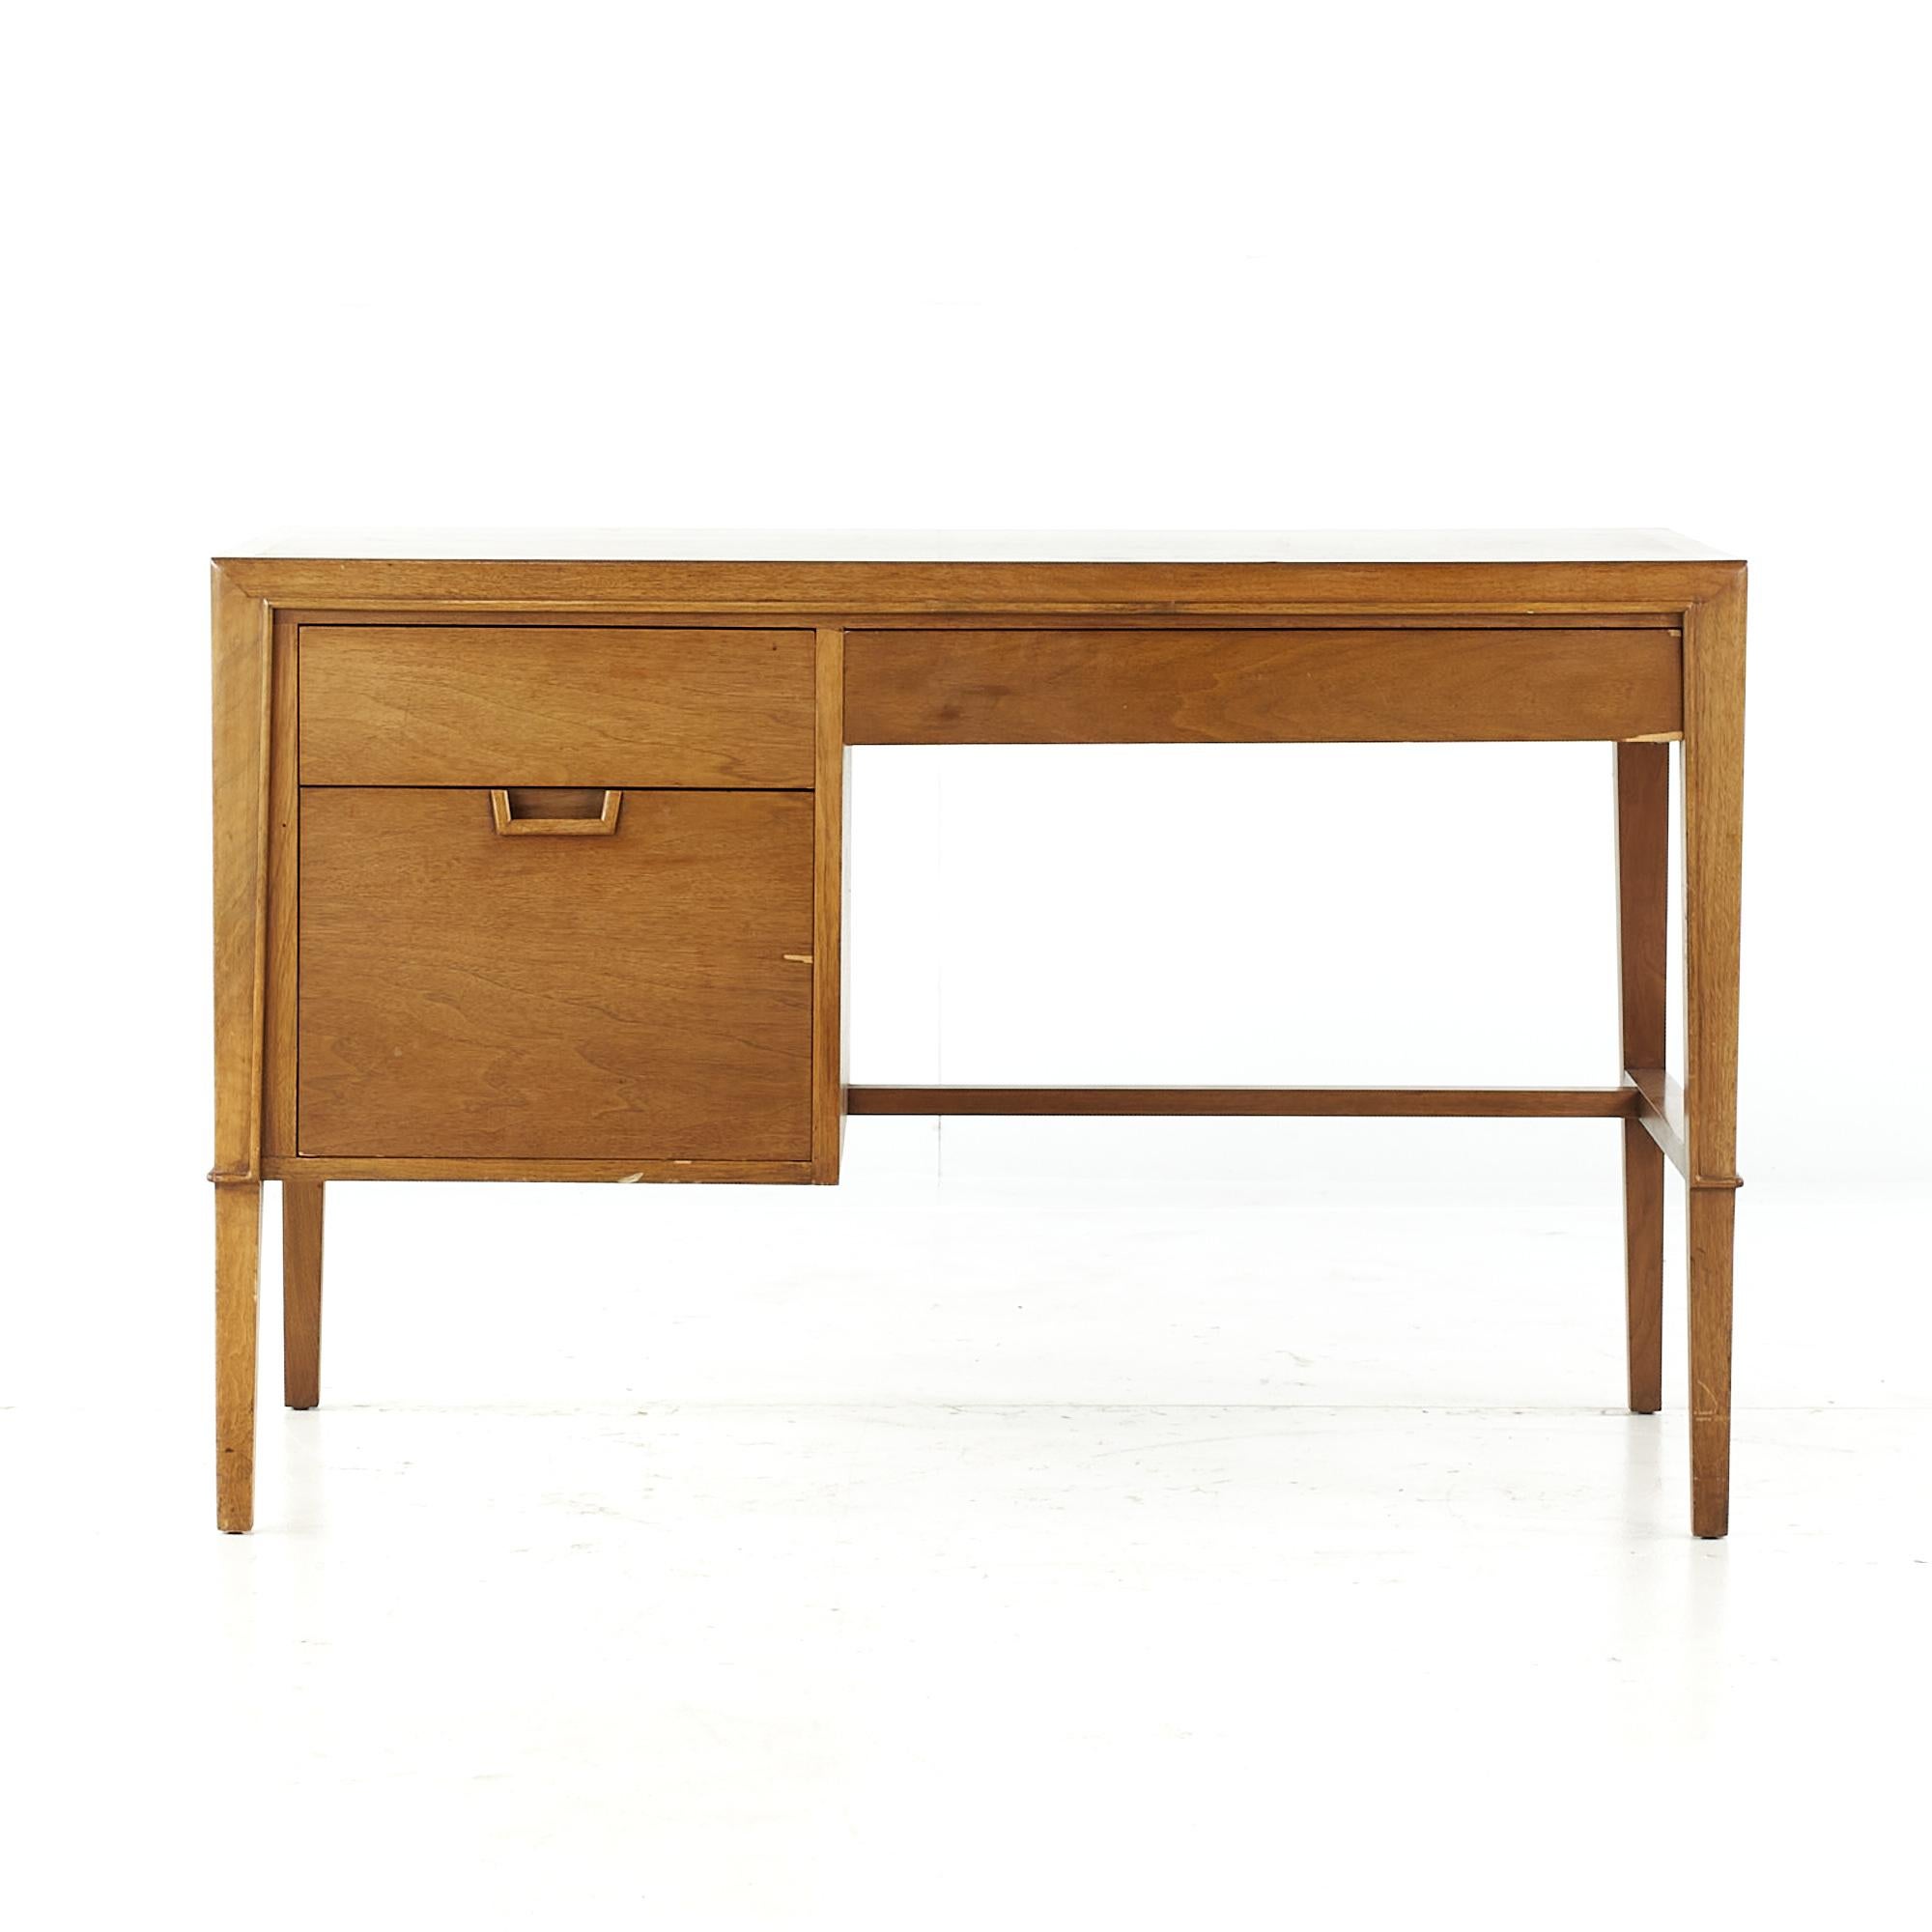 Mount Airy Janus mid century walnut desk

This desk measures: 46 wide x 24 deep x 29.5 high, with a chair clearance of 24.5 inches

All pieces of furniture can be had in what we call restored vintage condition. That means the piece is restored